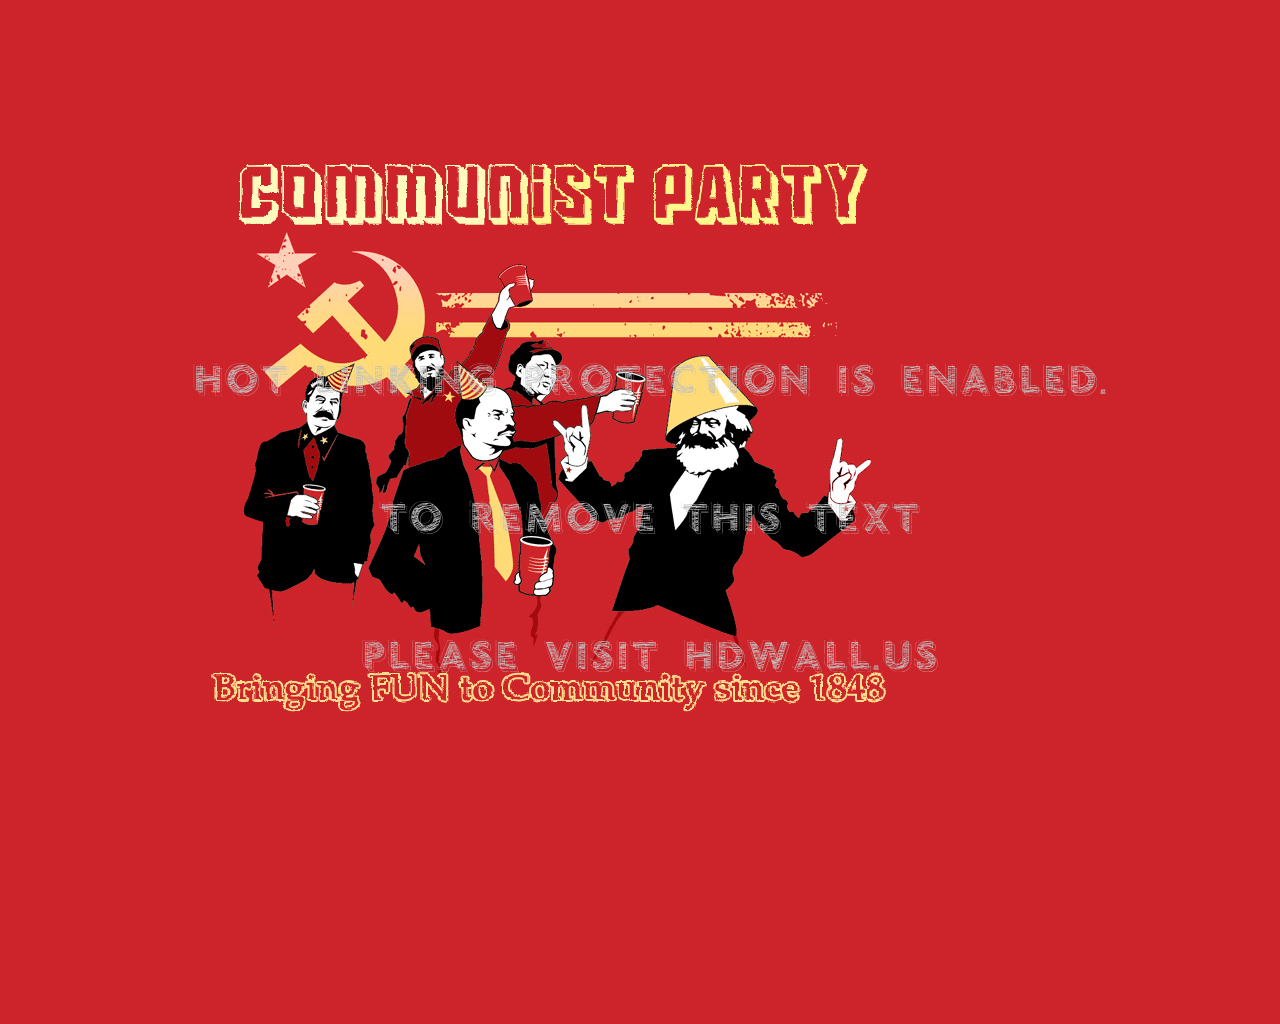 Other - Communism It's A Party , HD Wallpaper & Backgrounds